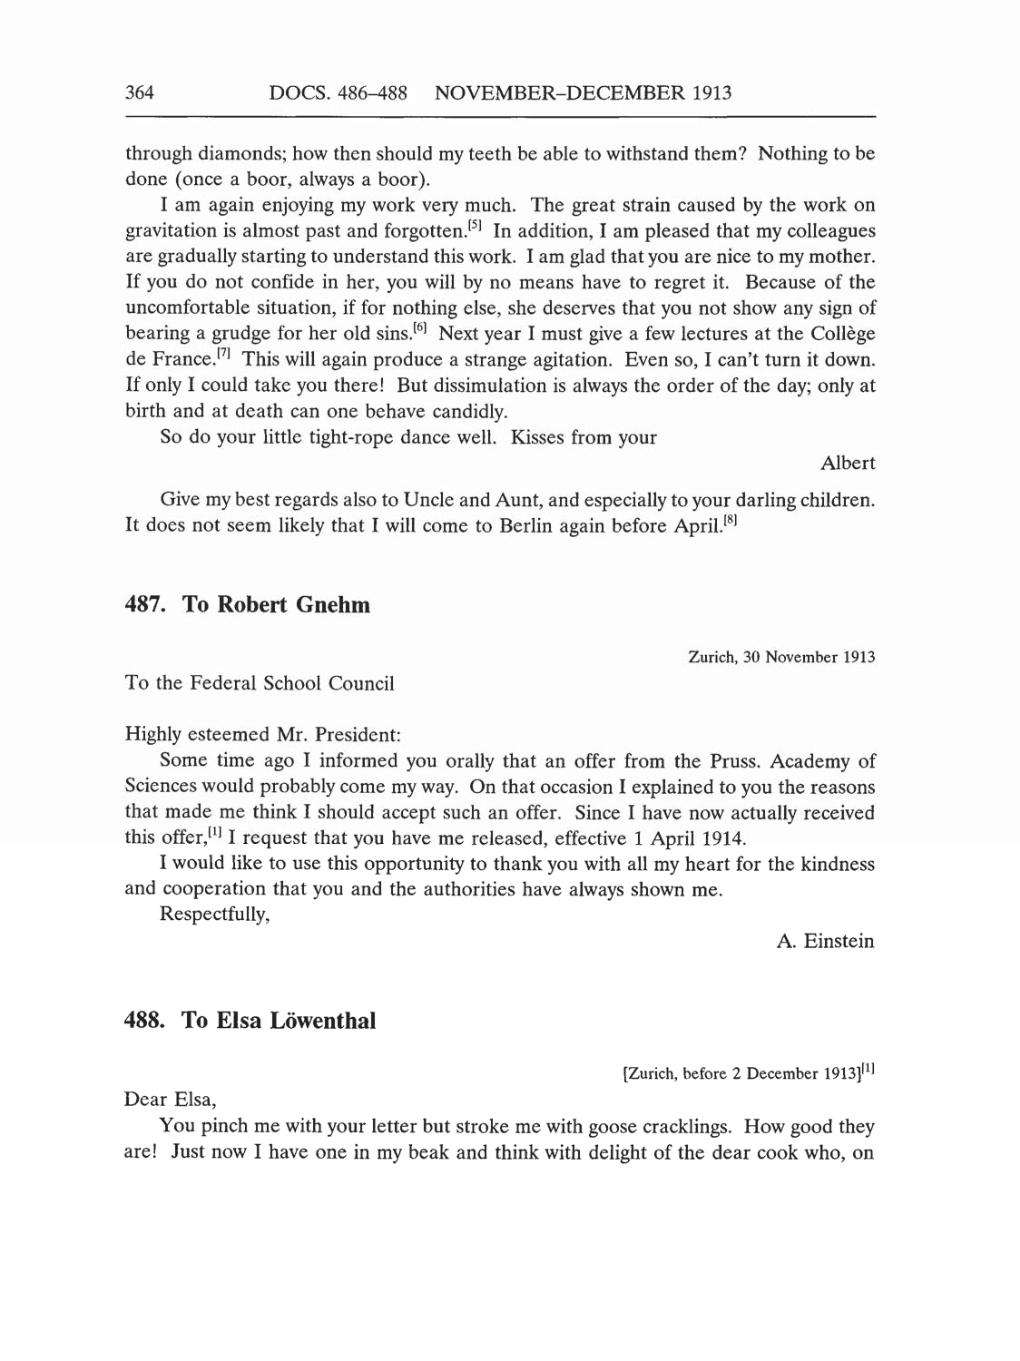 Volume 5: The Swiss Years: Correspondence, 1902-1914 (English translation supplement) page 364